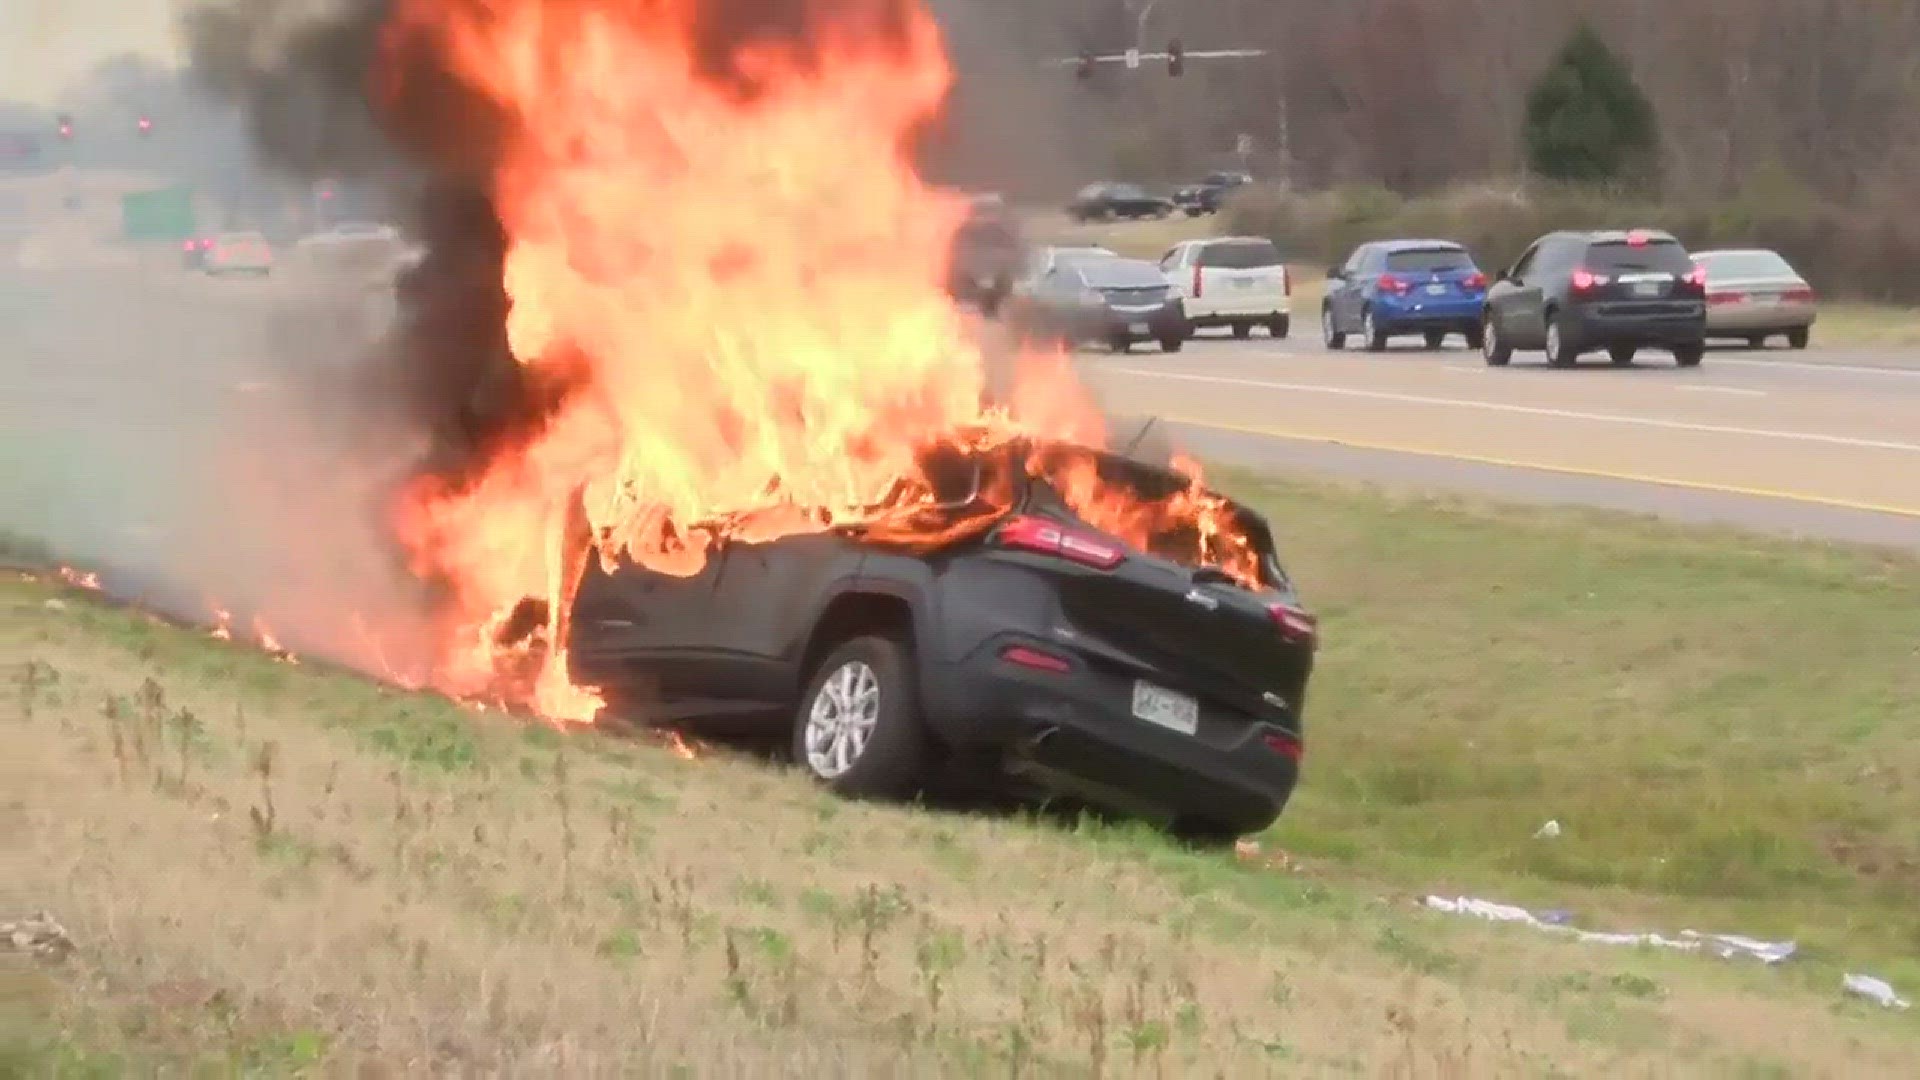 After crews put out a car fire in Memphis, they found a bible unharmed (Video: WMC Action News 5)